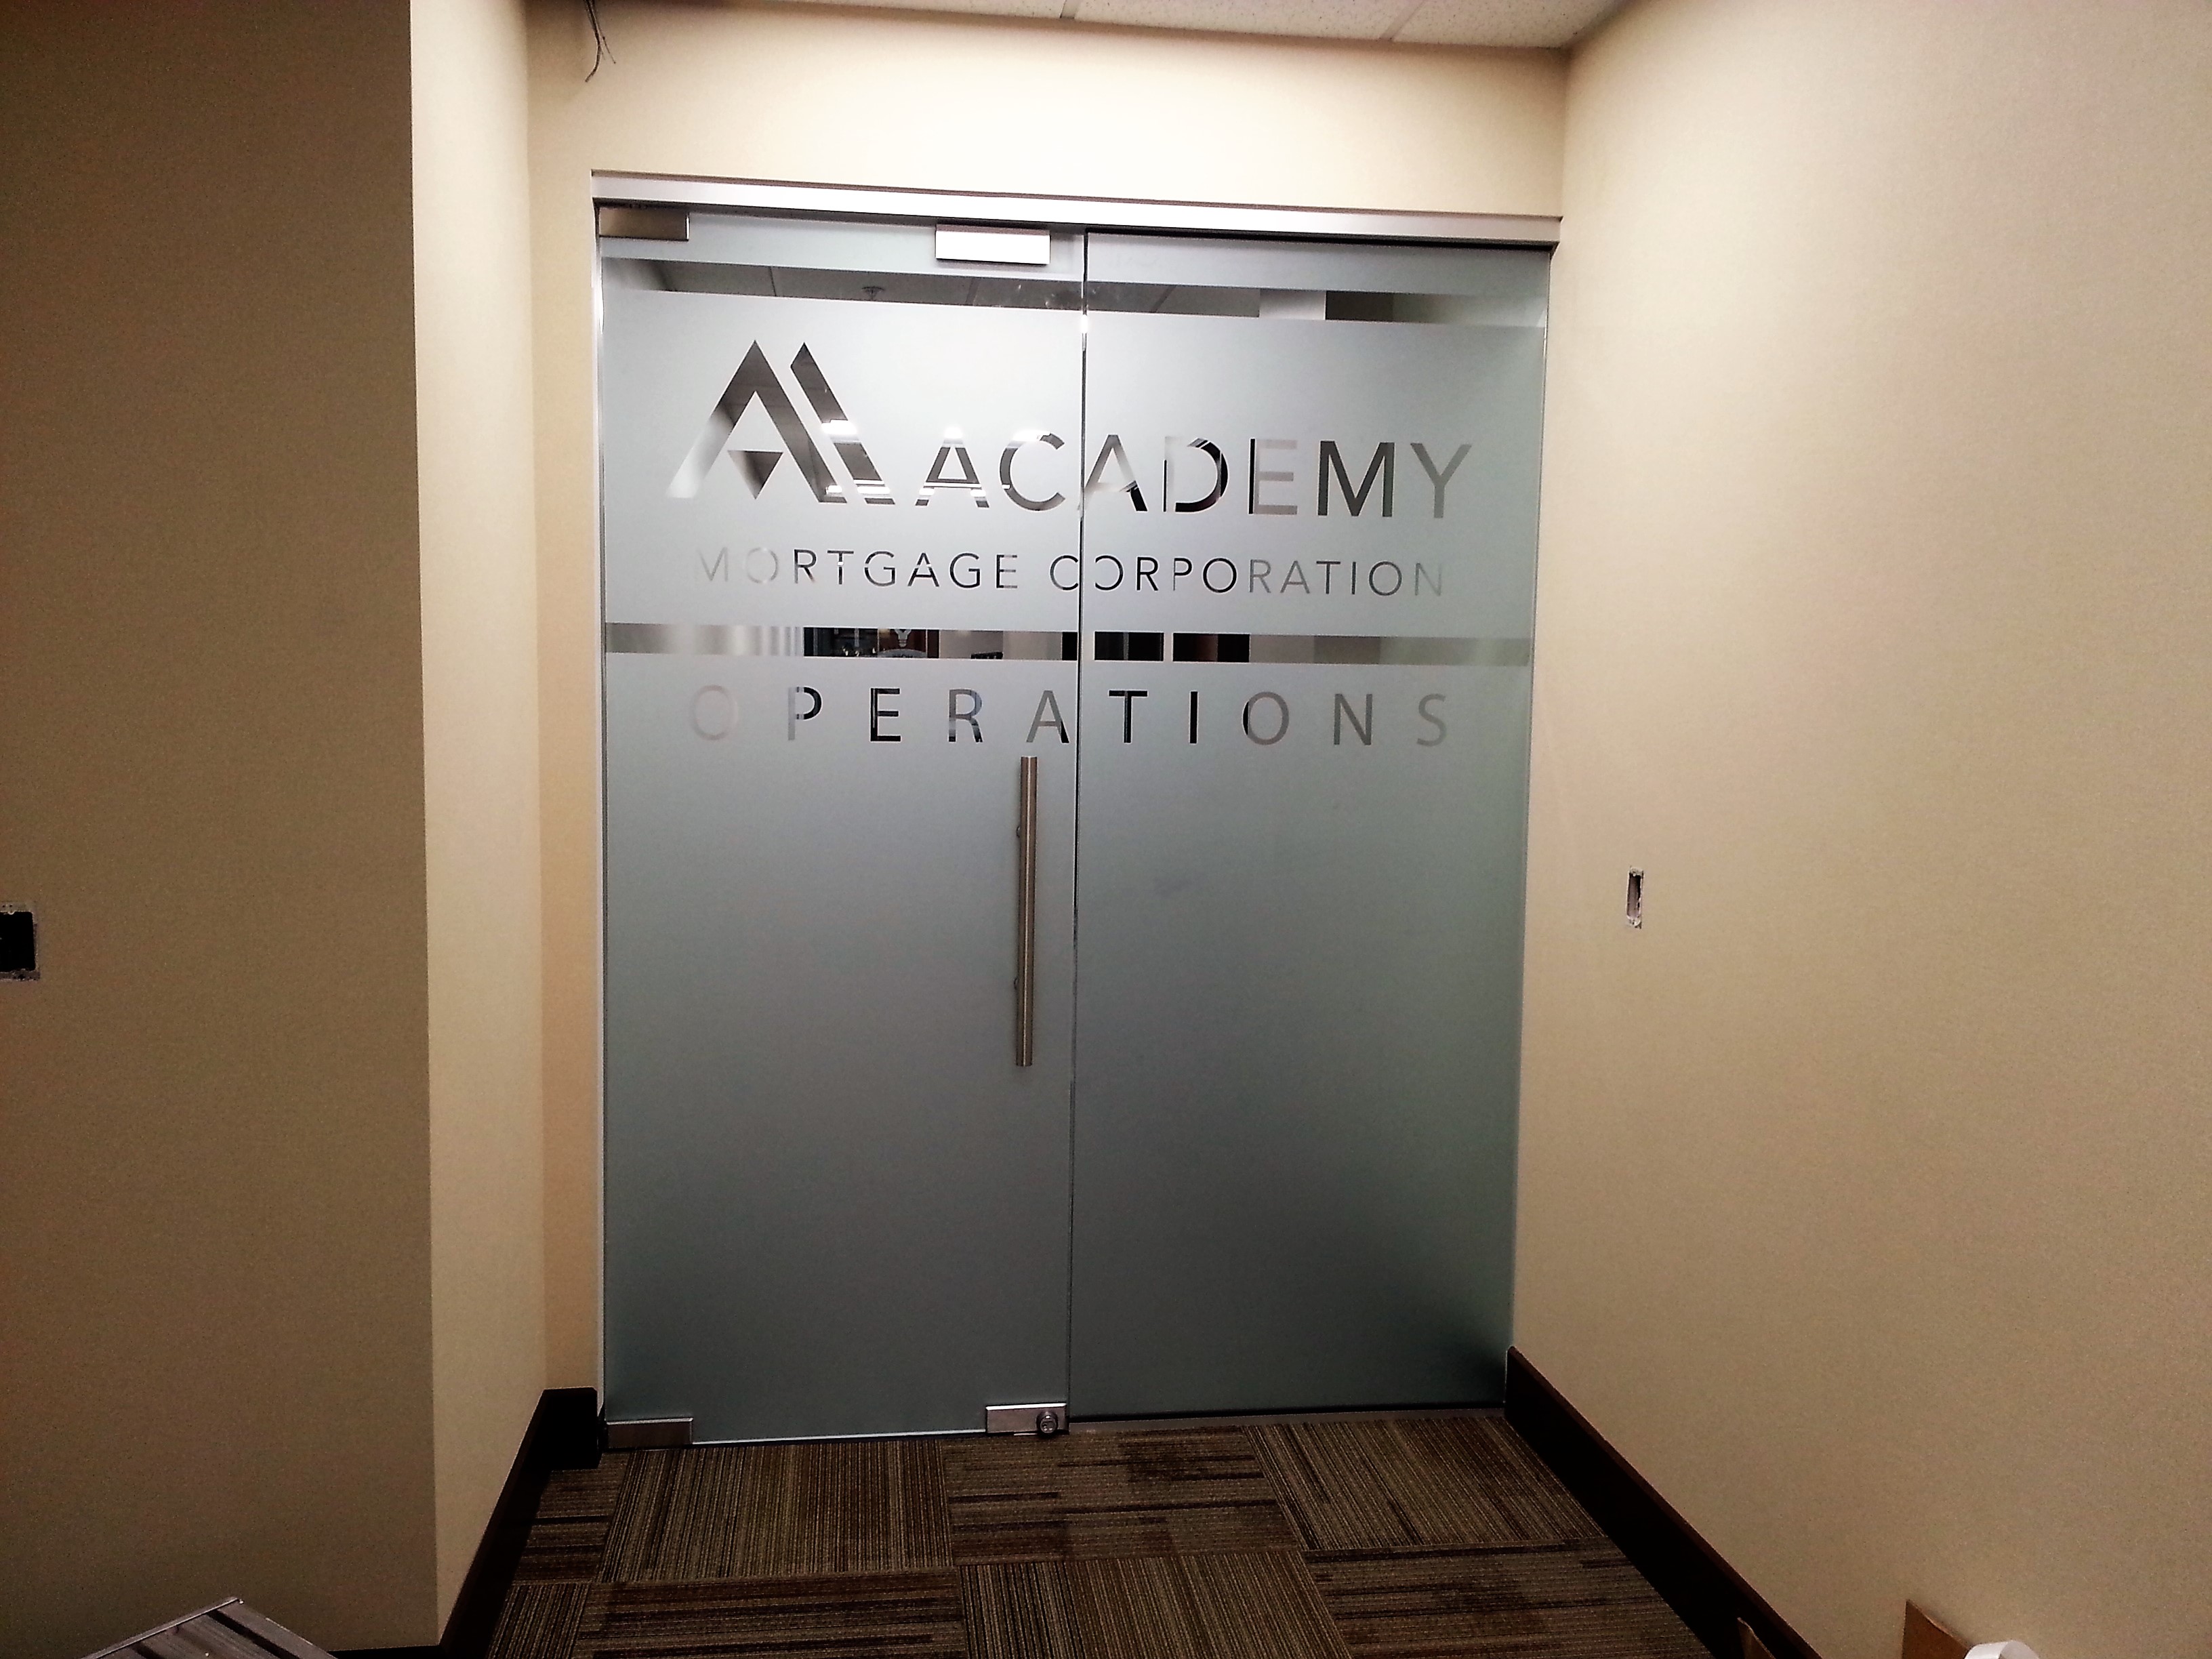 Academy Mortage Corporation door graphic for operations